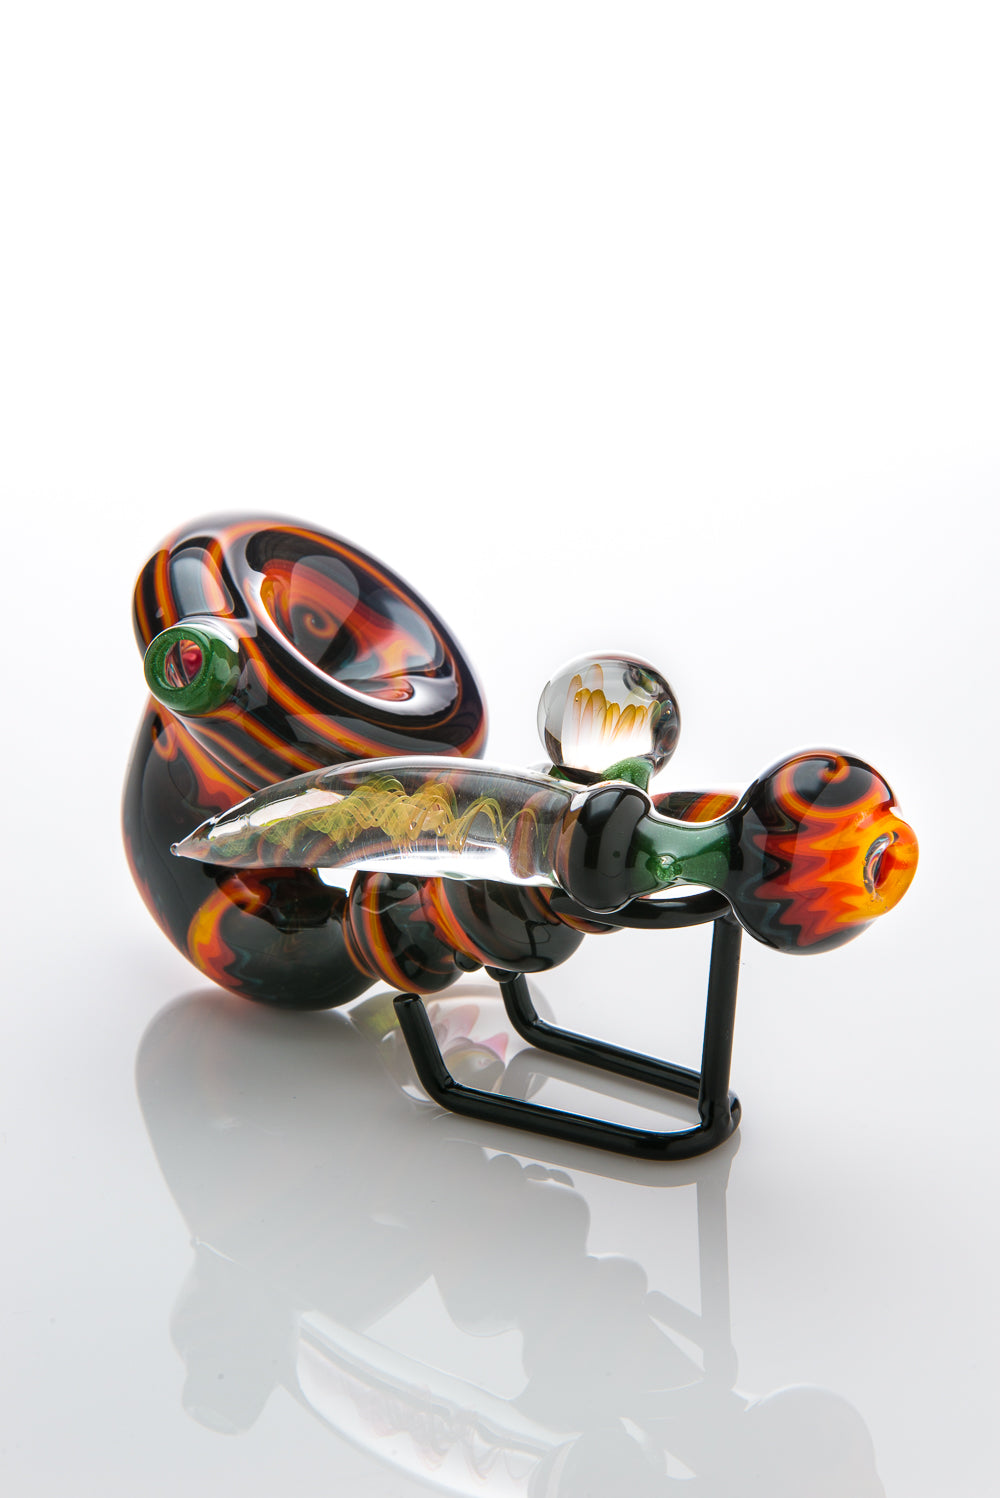 Sherlock with Ice Cycle Marble by Big Z